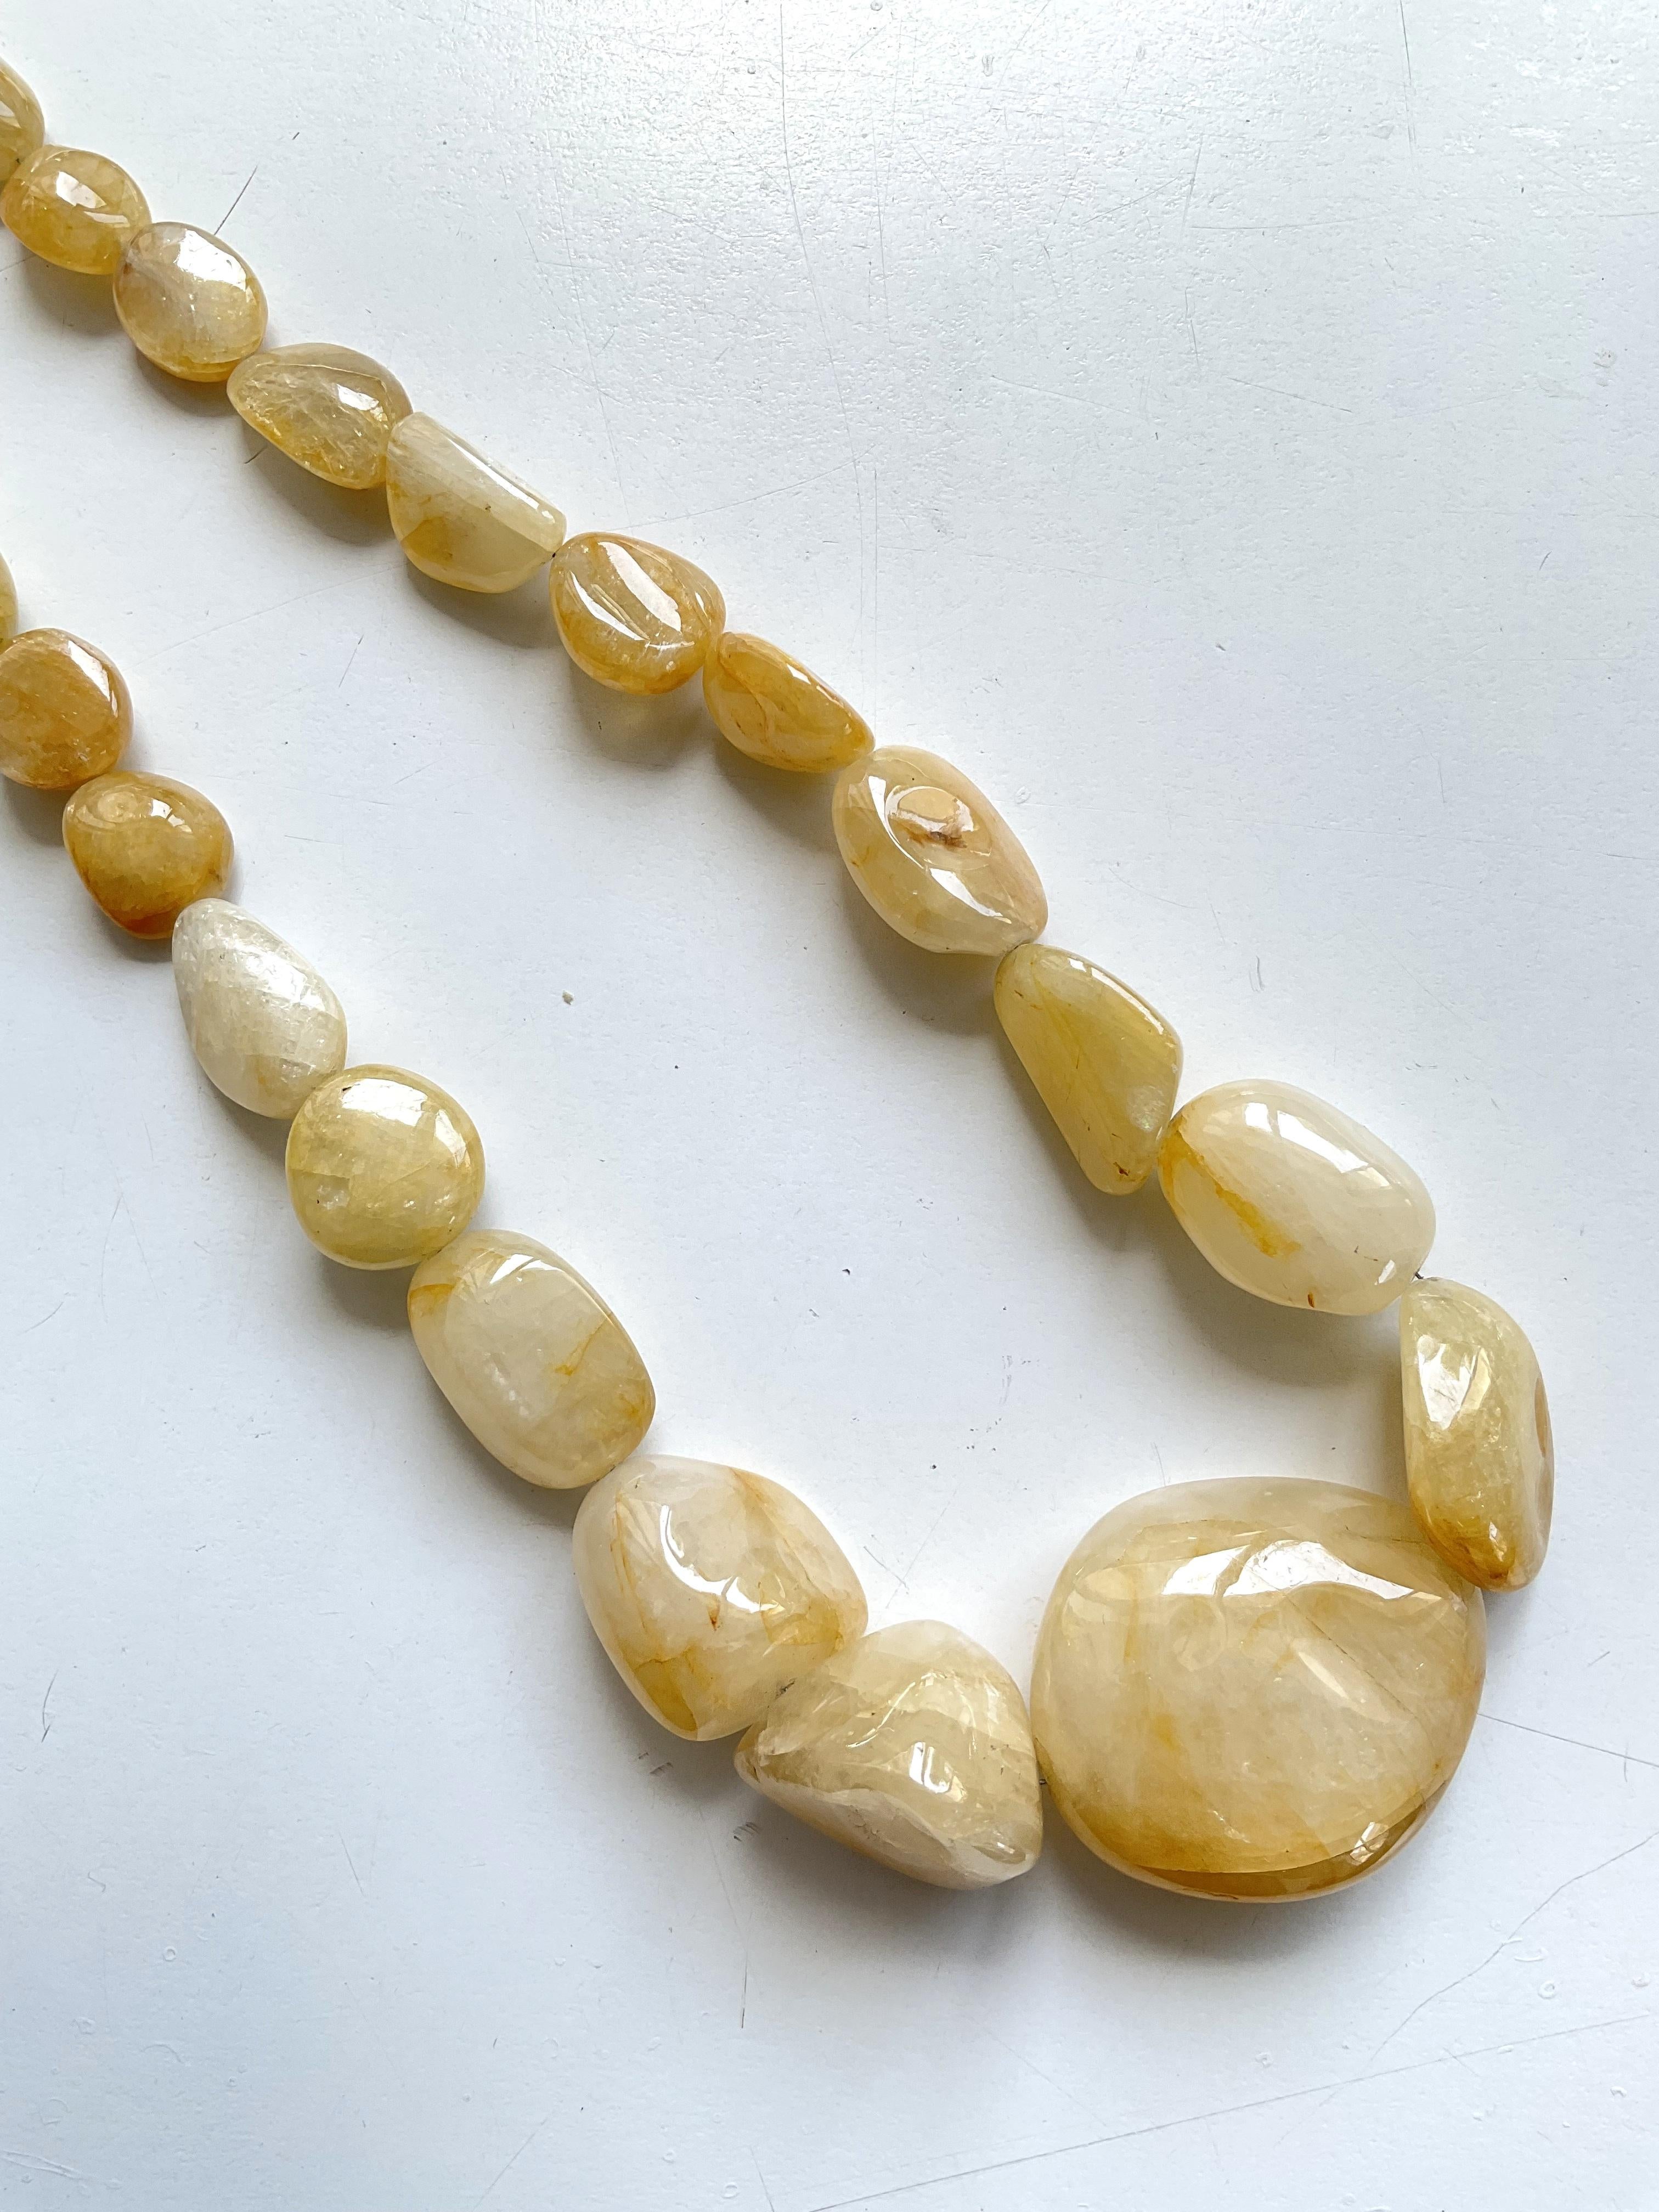 Bead 1111.20 Carats Big Size Yellow Sapphire Plain Tumbled Natural Gemstone Necklace For Sale